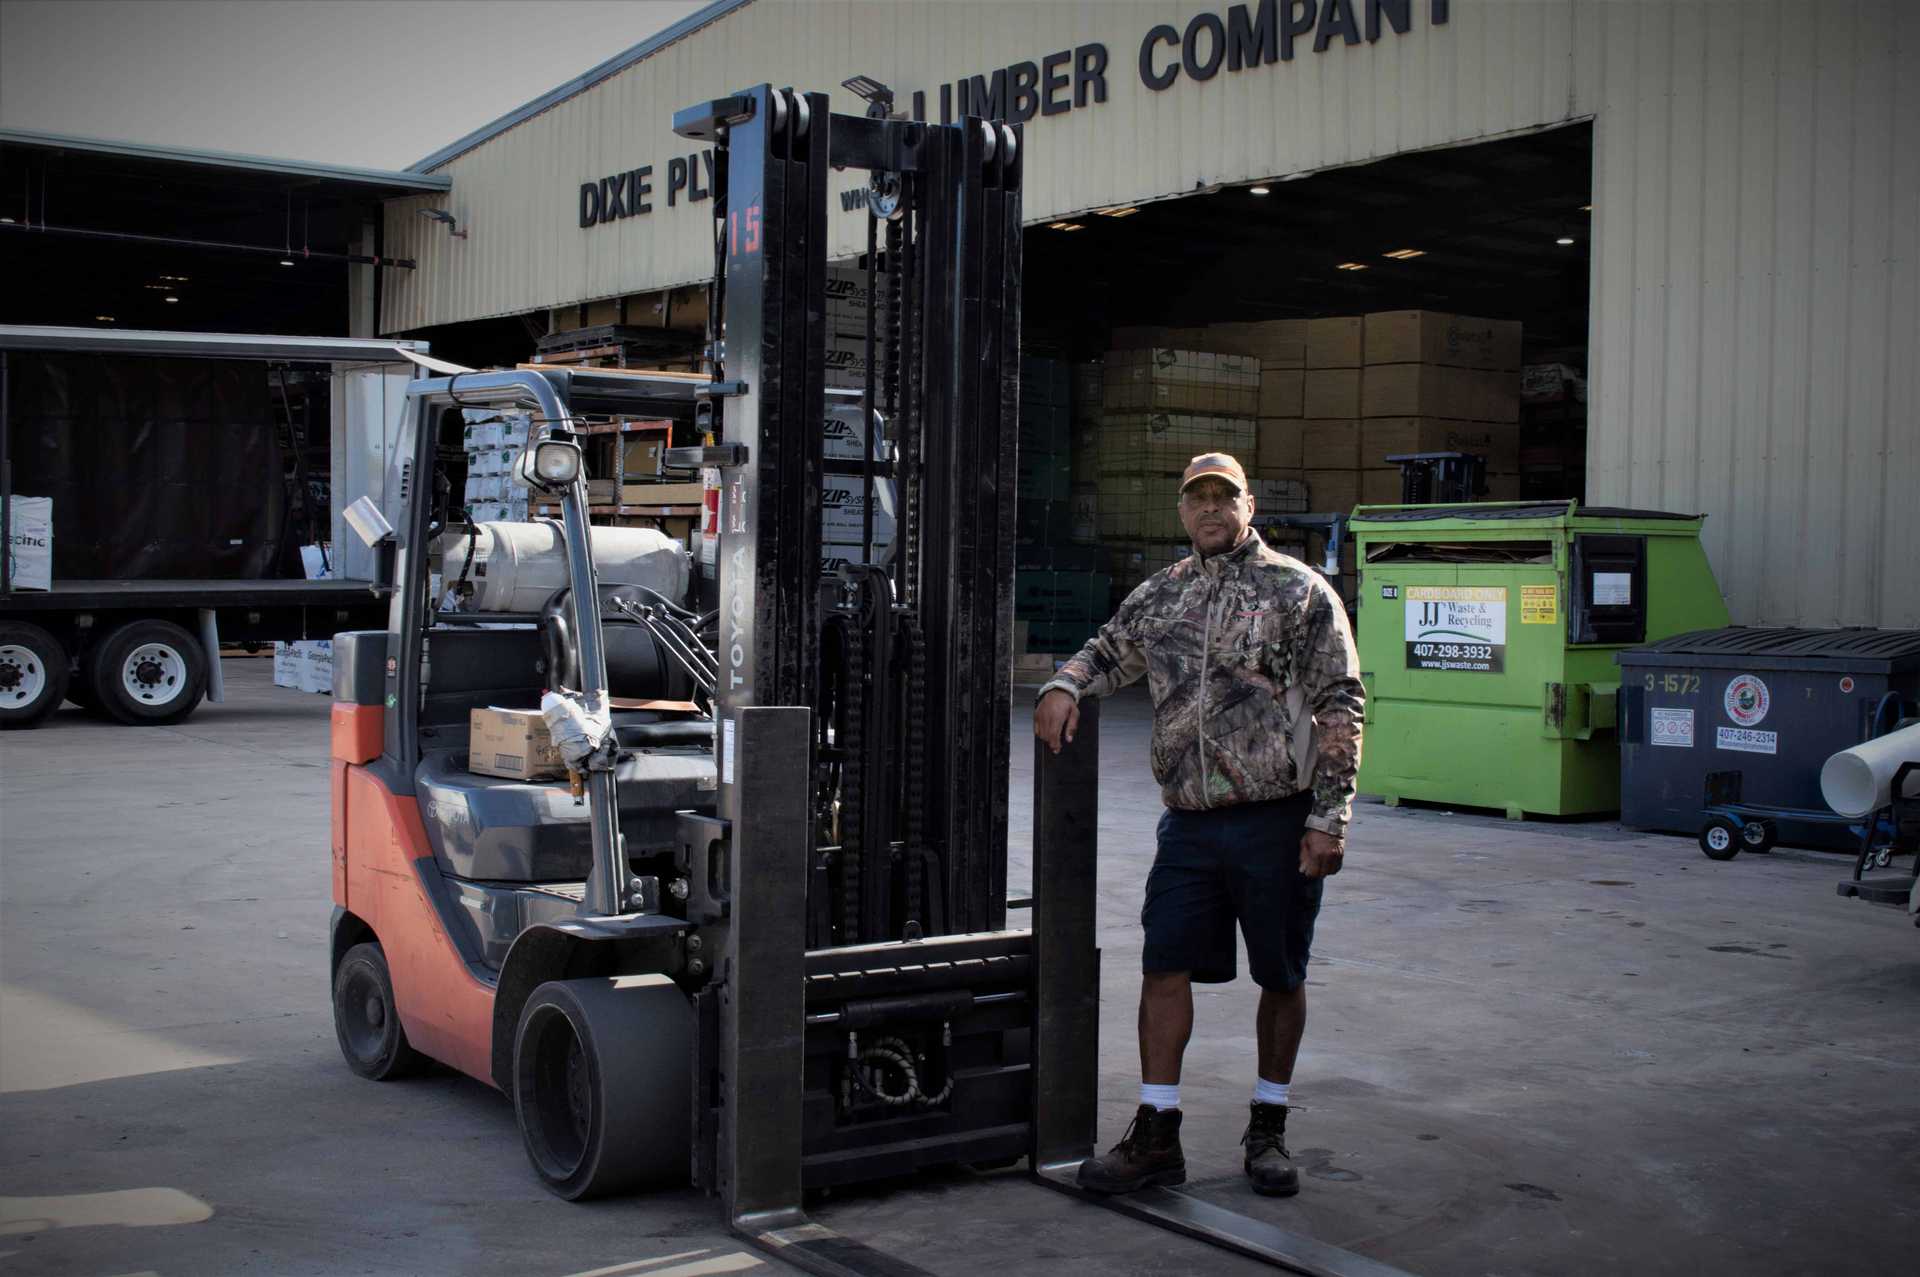 DIXIEPLY Orlando forklift